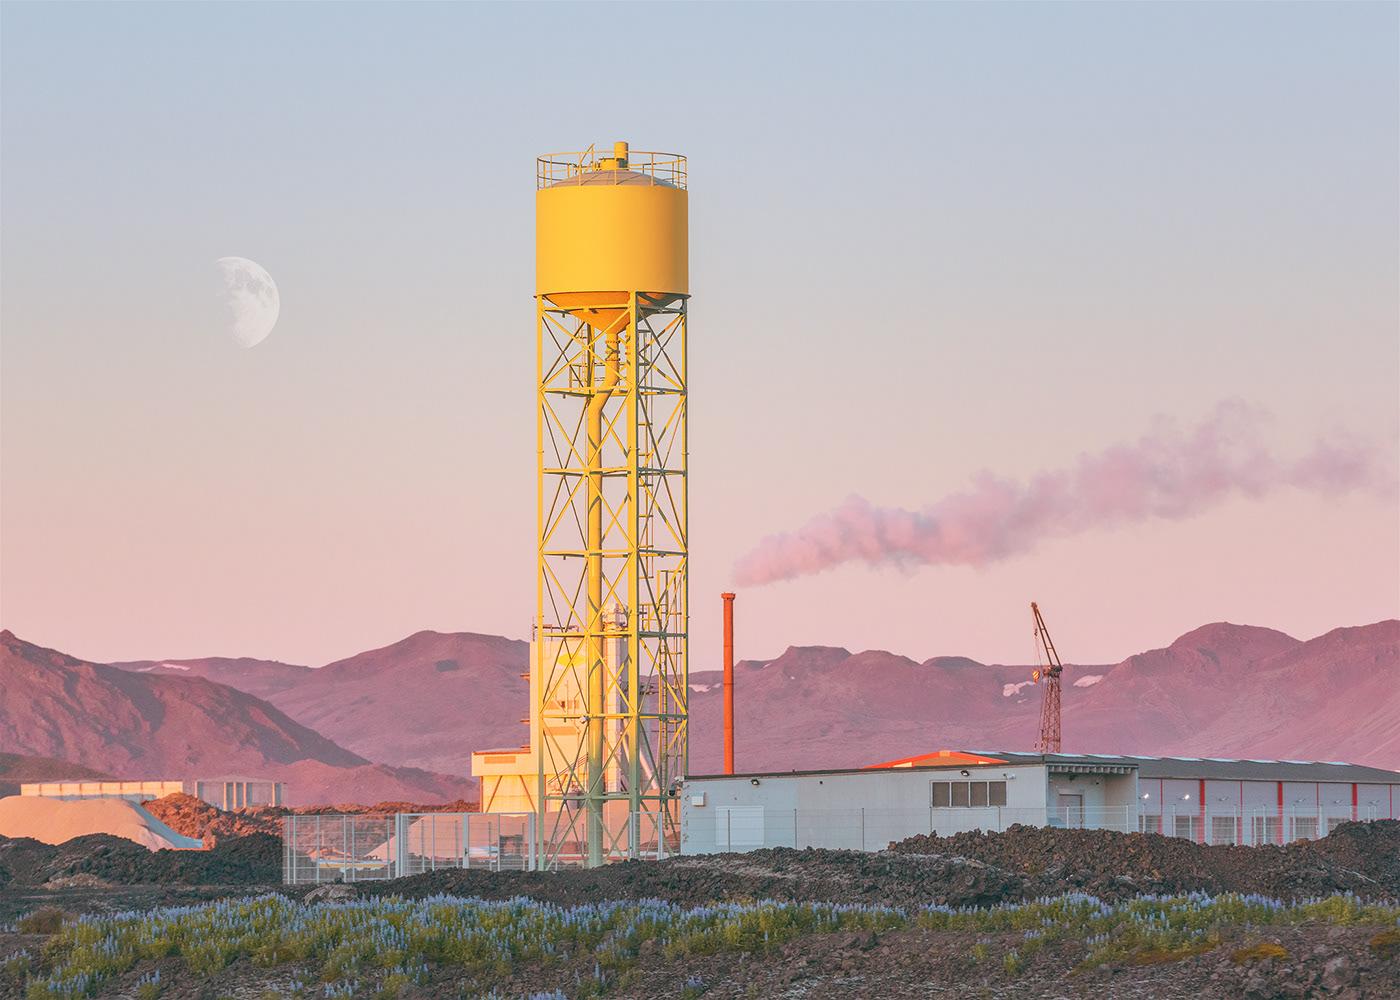 Industrial complex beneath the moon during sunset in Iceland.